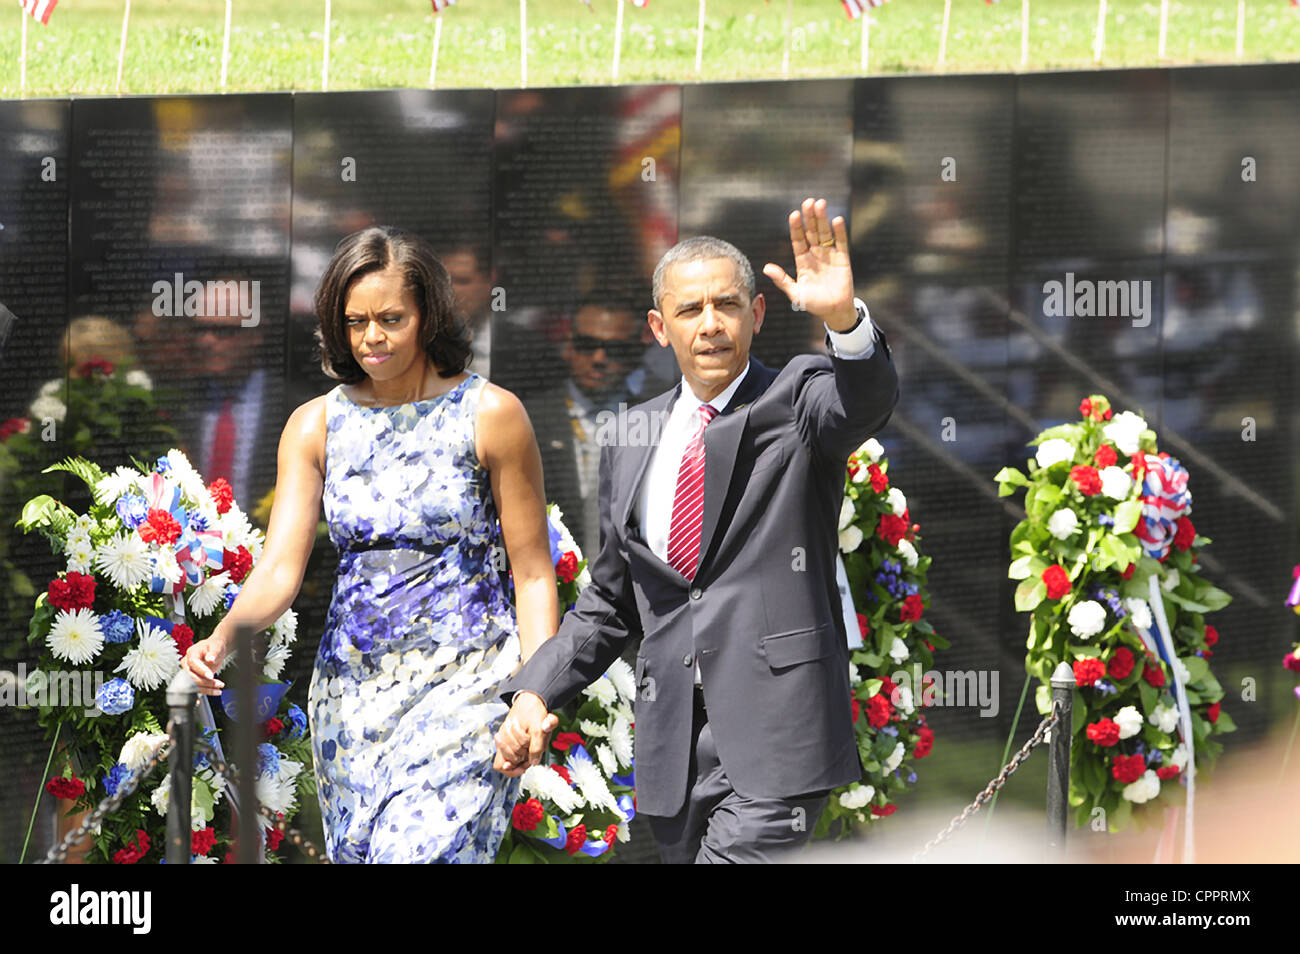 US President Barack Obama and first lady Michelle Obama arrive for Memorial Day ceremonies marking the 50th anniversary of the Vietnam War at the Vietnam Memorial Wall May 28, 2012 in Washington, DC Stock Photo